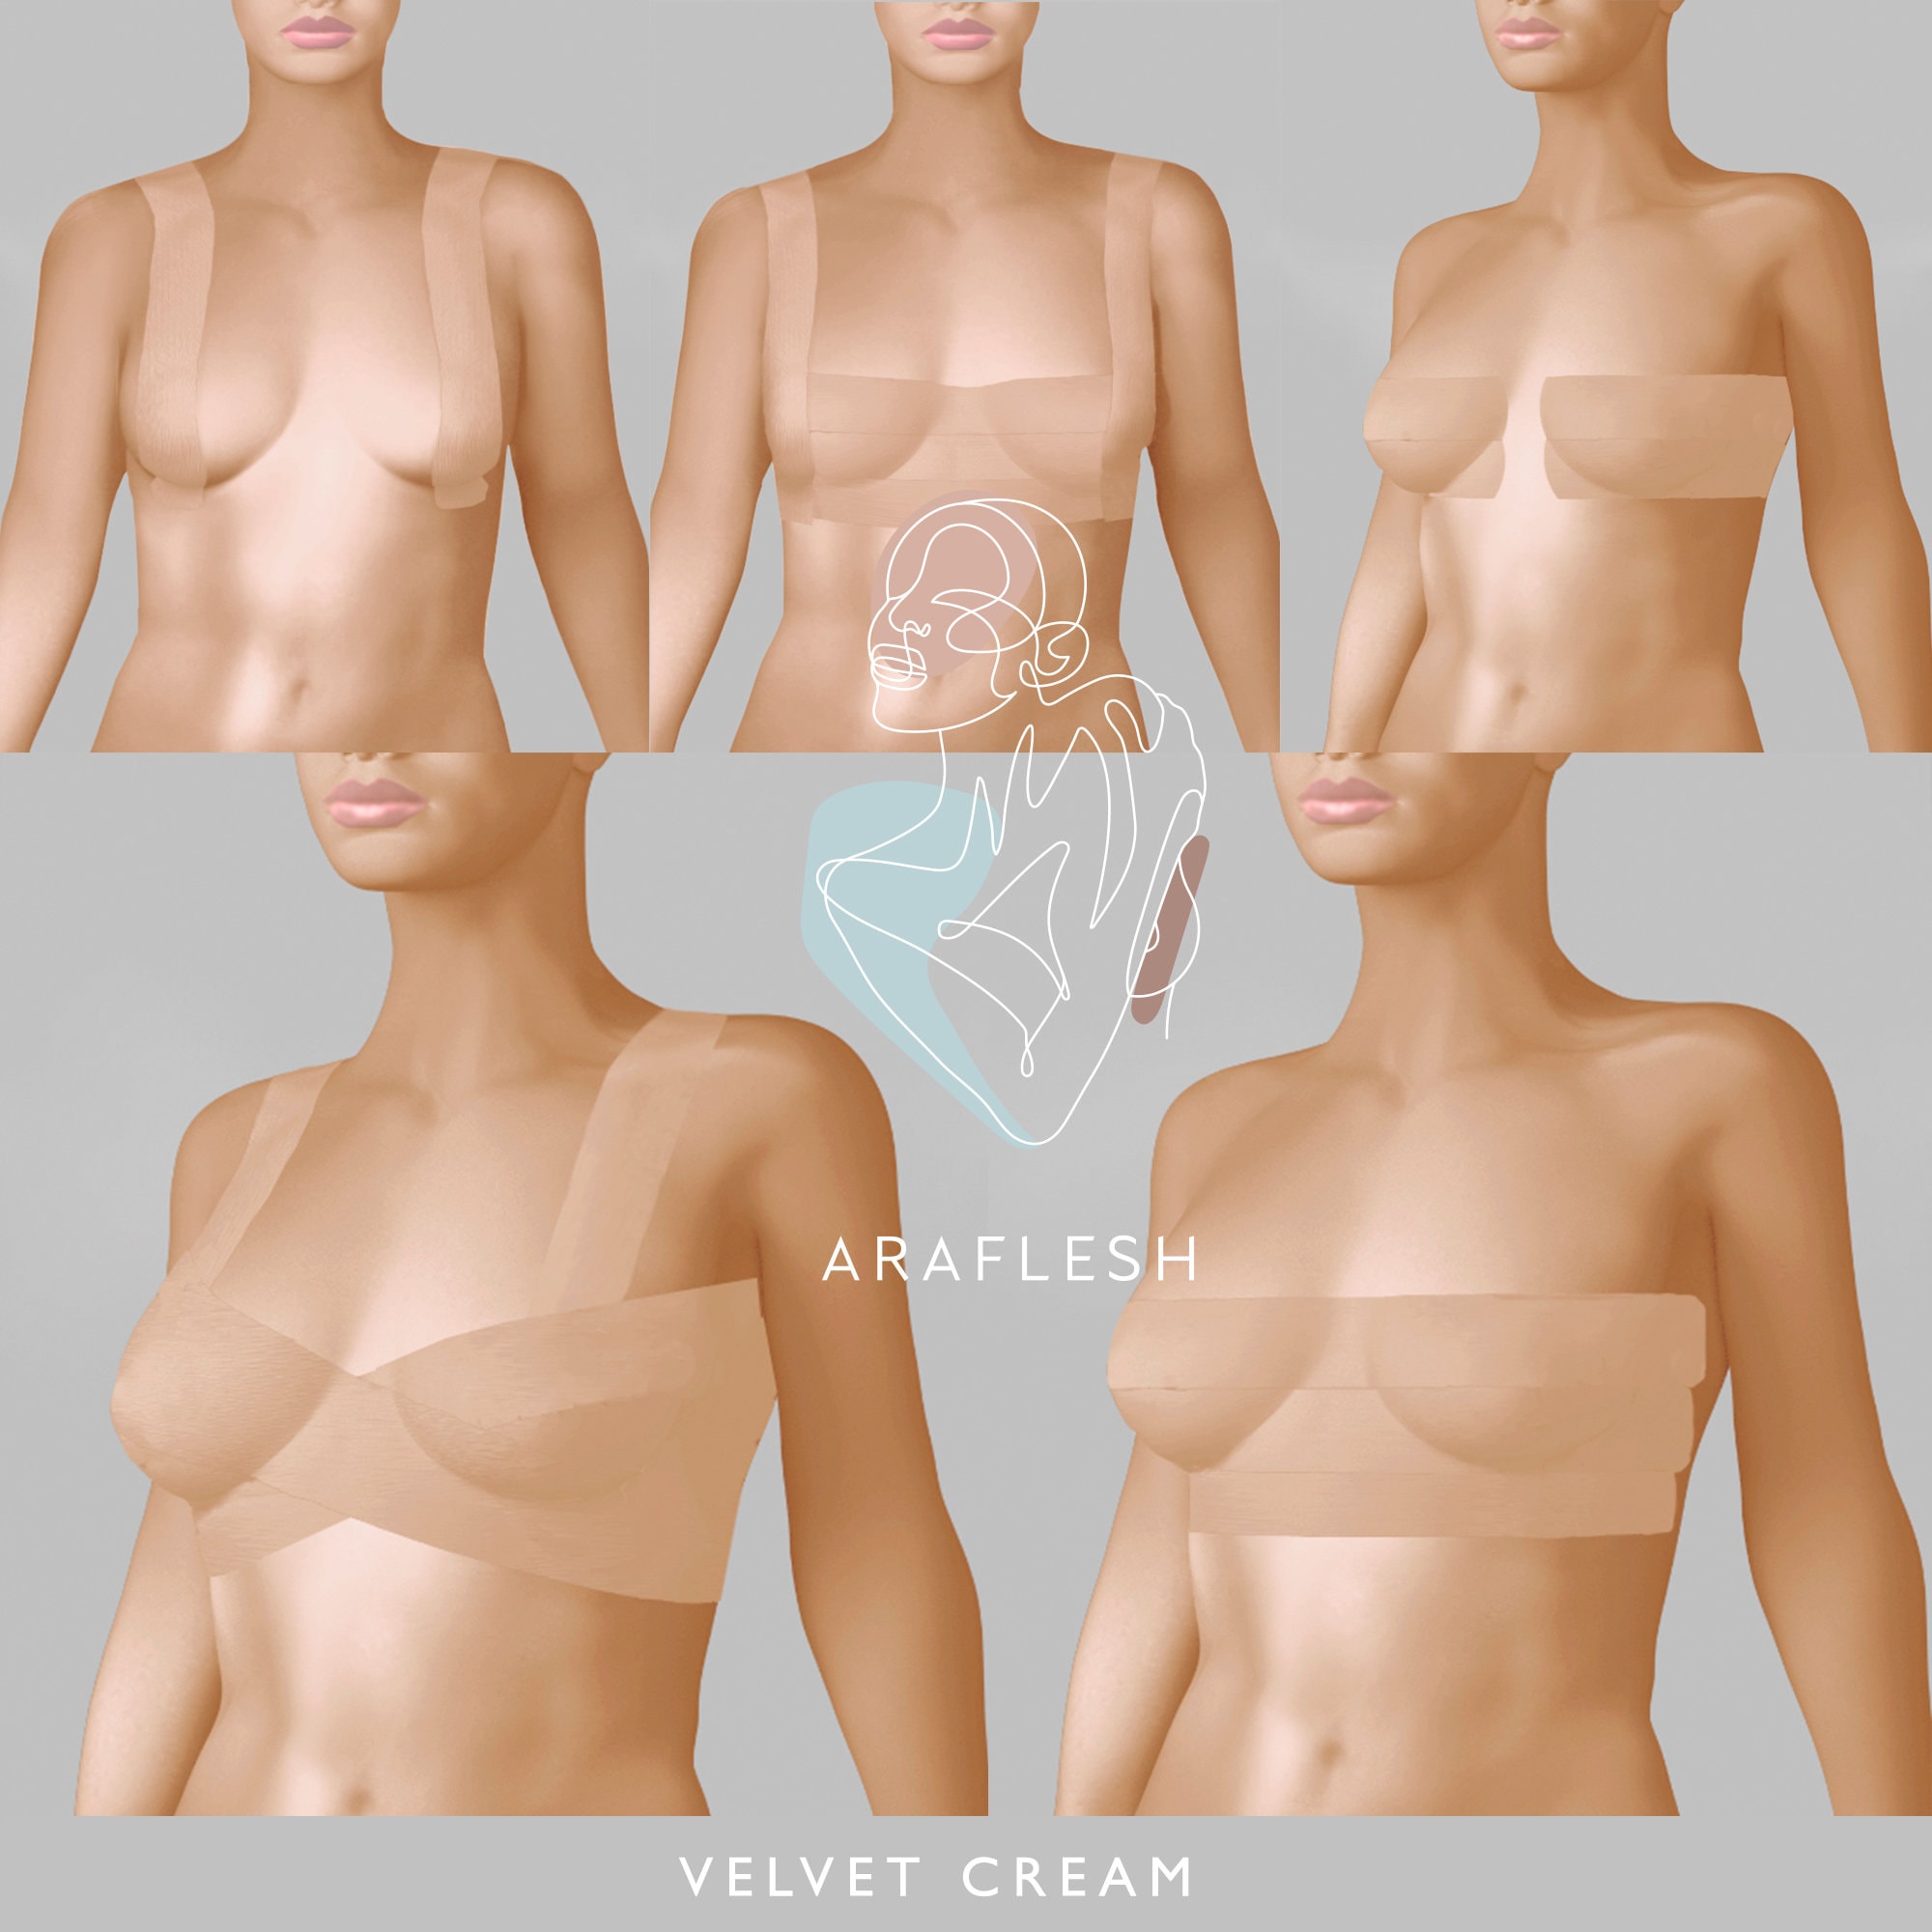 Aurora Cosplay F Cup Breasts With Hollow-out Back for Summer, Gift